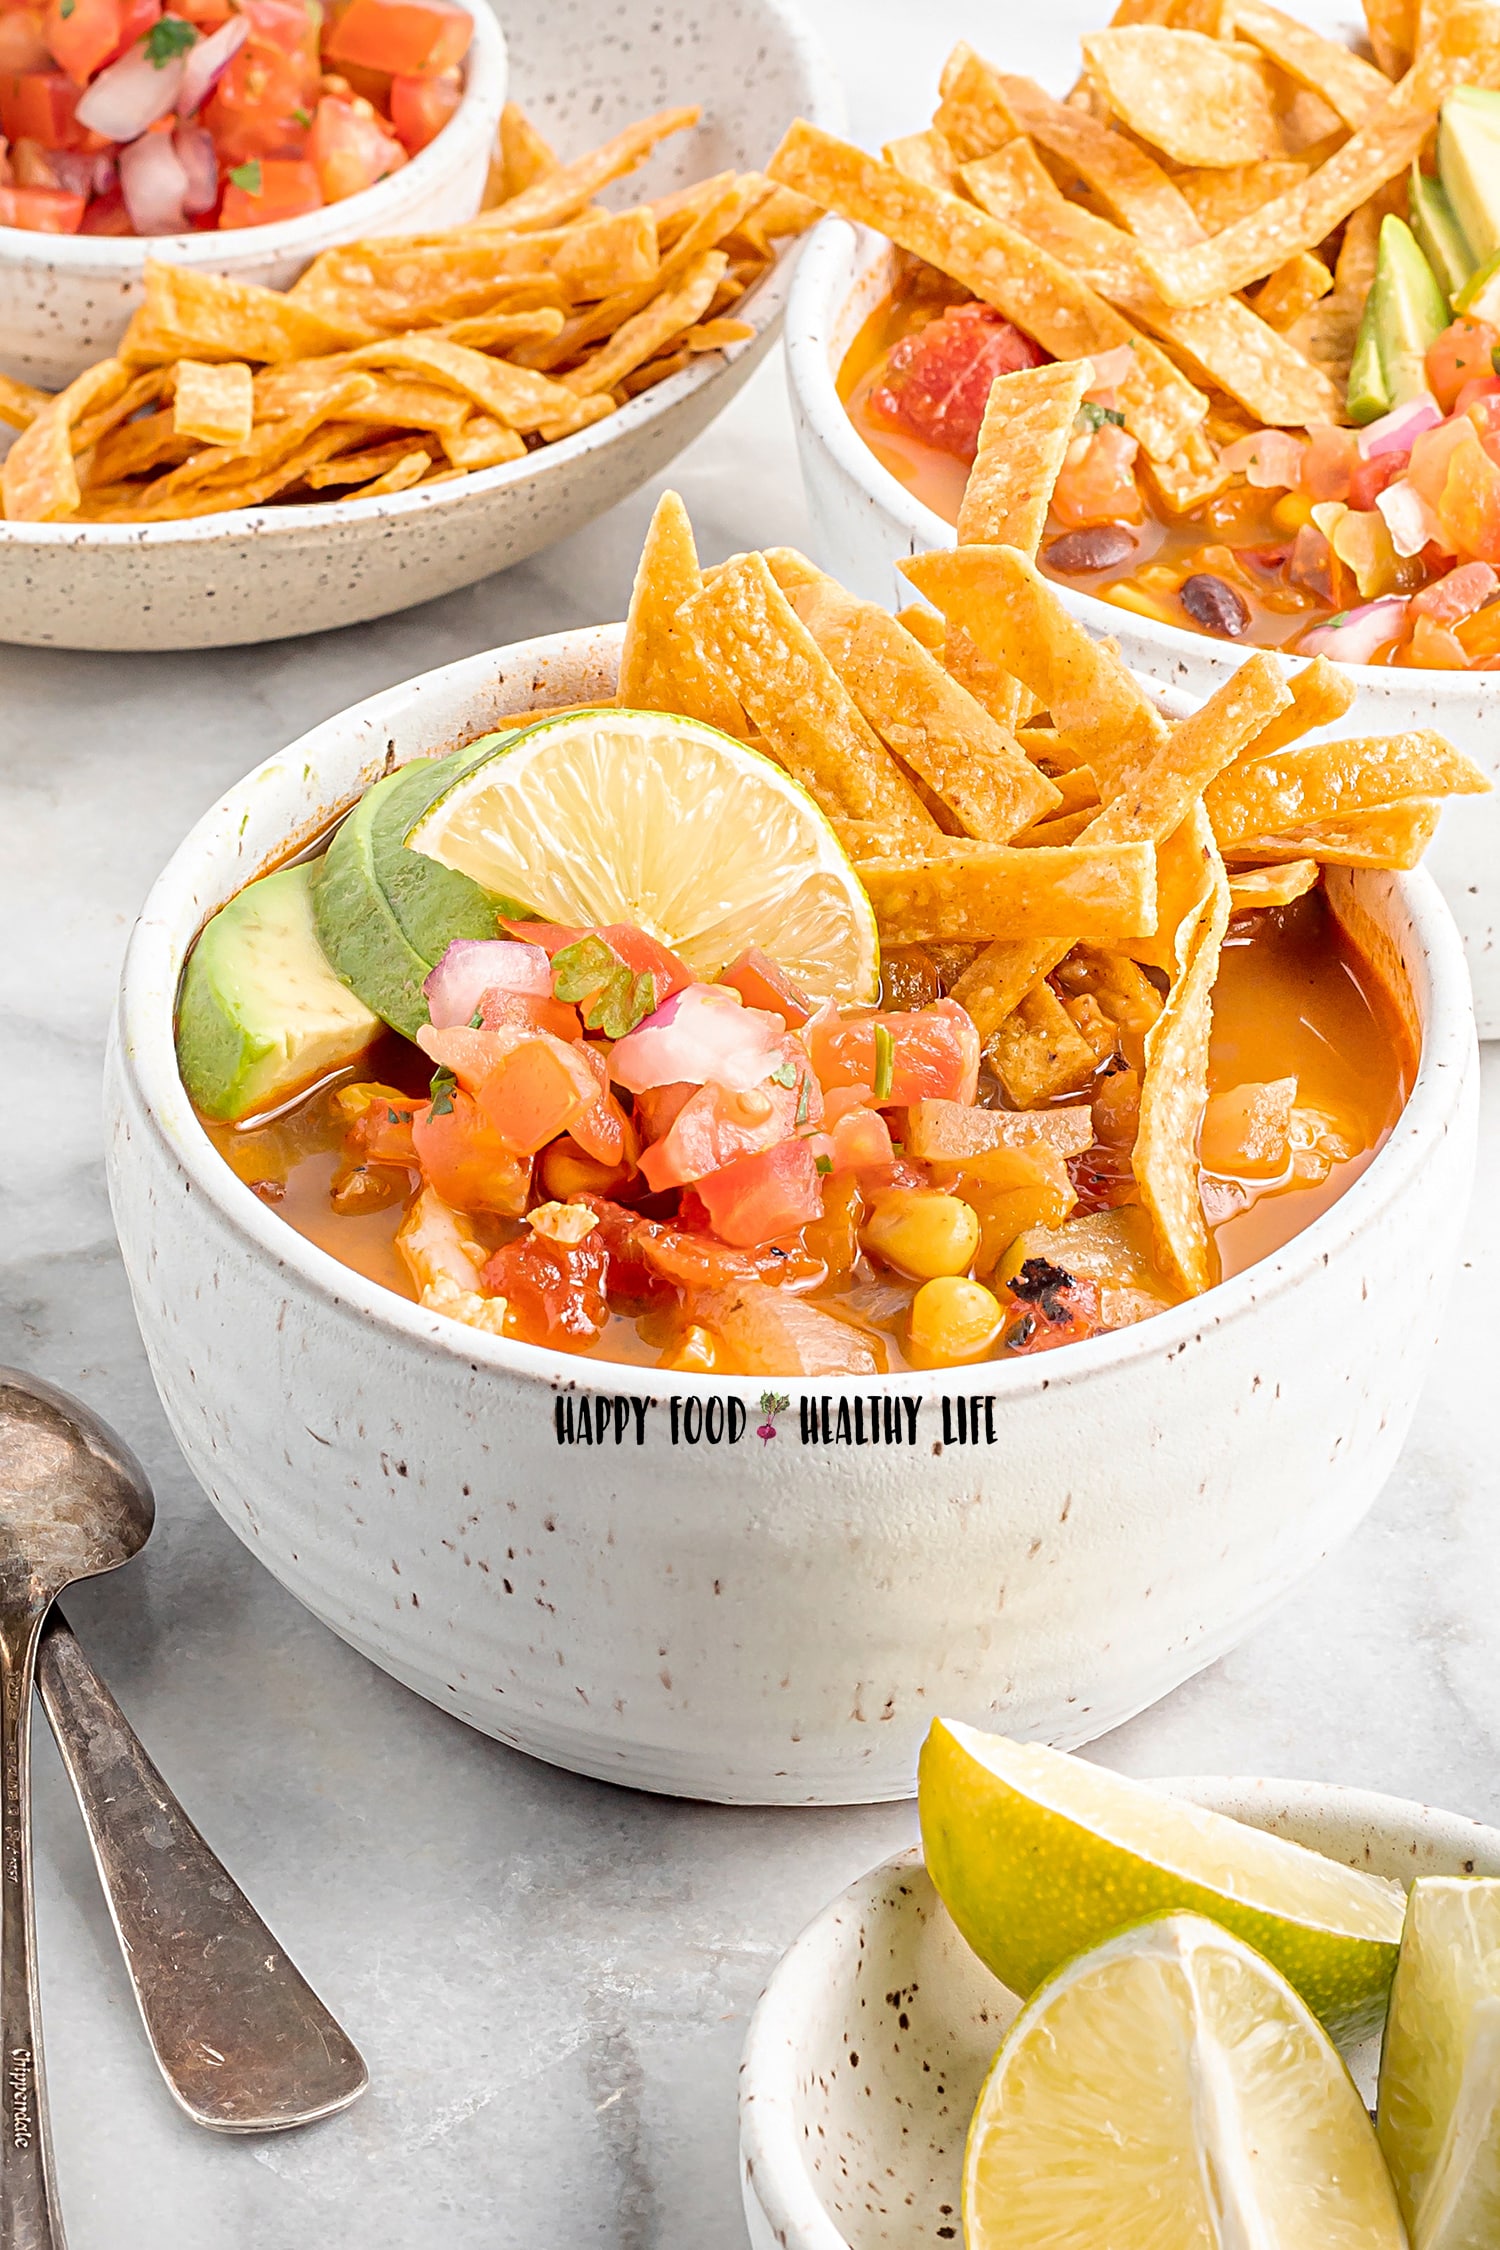 Photo of two white bowls filled with Vegan Tortilla Soup and topped with fresh lime wedges and tortilla strips. There is a bowl of lime wedges in the foreground, as well as a silver spoon, and and a bowl of tortilla strips and salsa in the background.